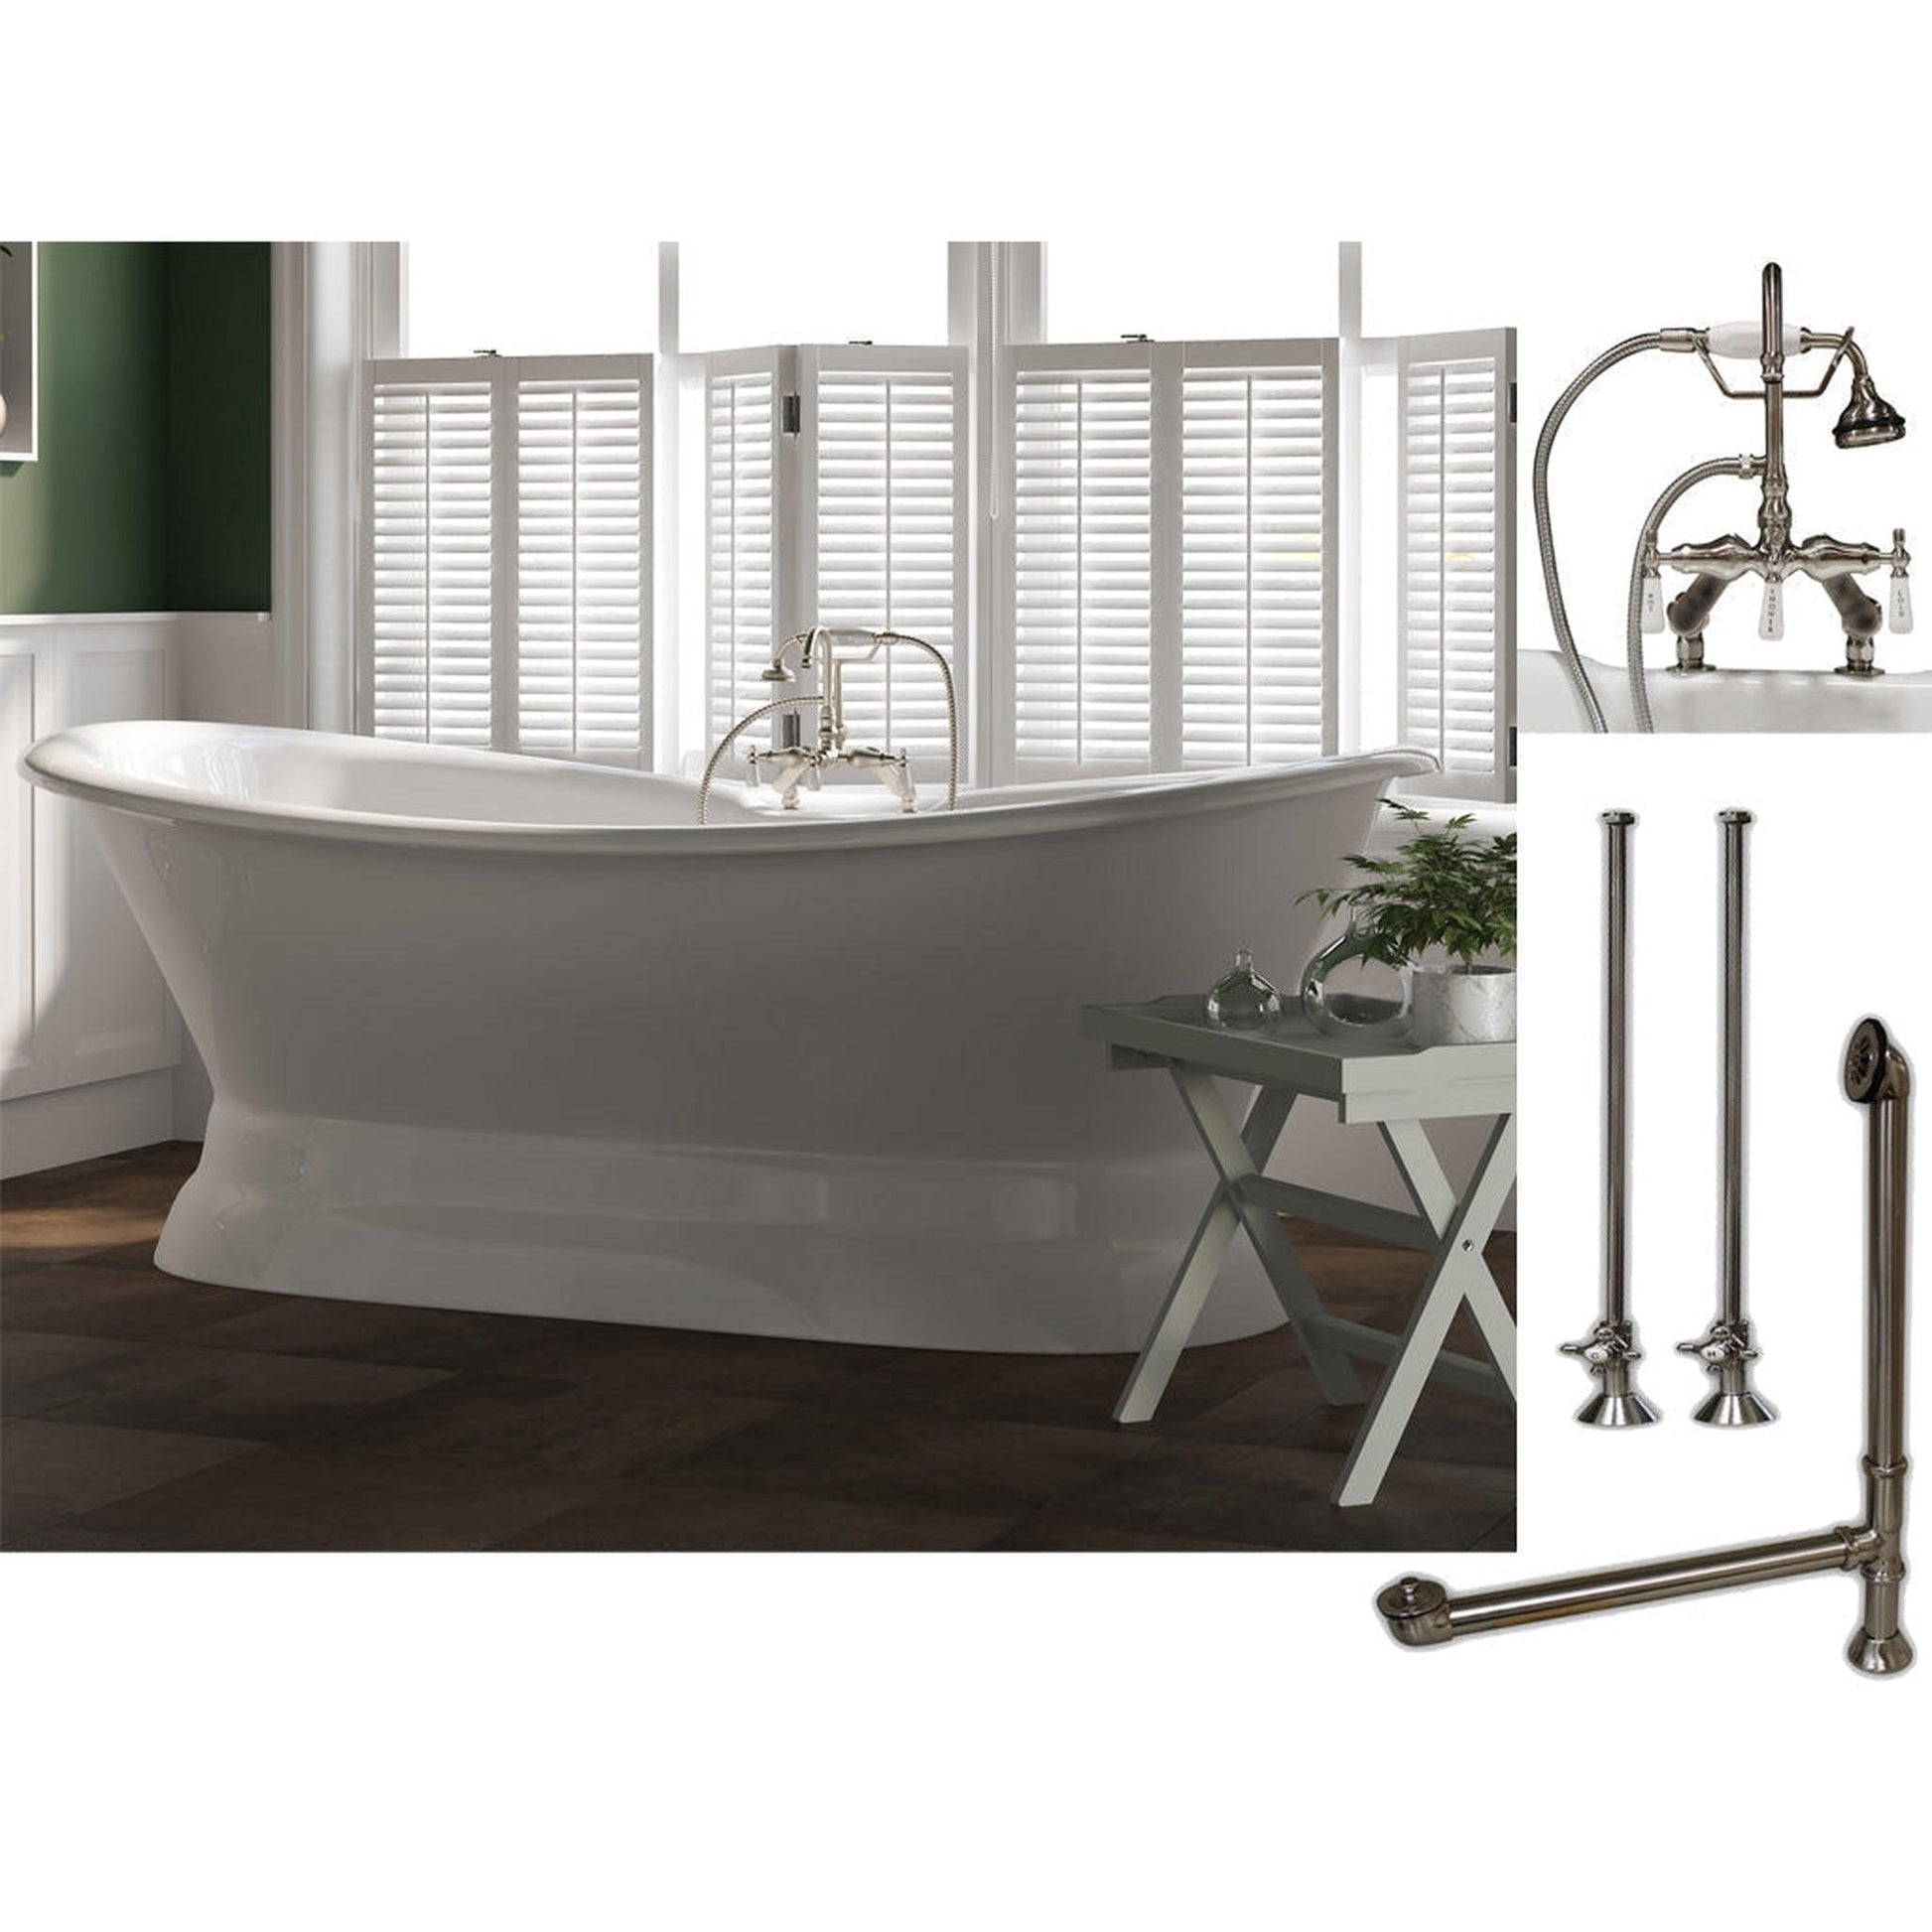 Cambridge Plumbing 71" White Cast Iron Double Slipper Pedestal Bathtub With Deck Holes And Complete Plumbing Package Including Porcelain Lever English Telephone Brass Faucet, Supply Lines, Drain And Overflow Assembly In Brushed Nickel